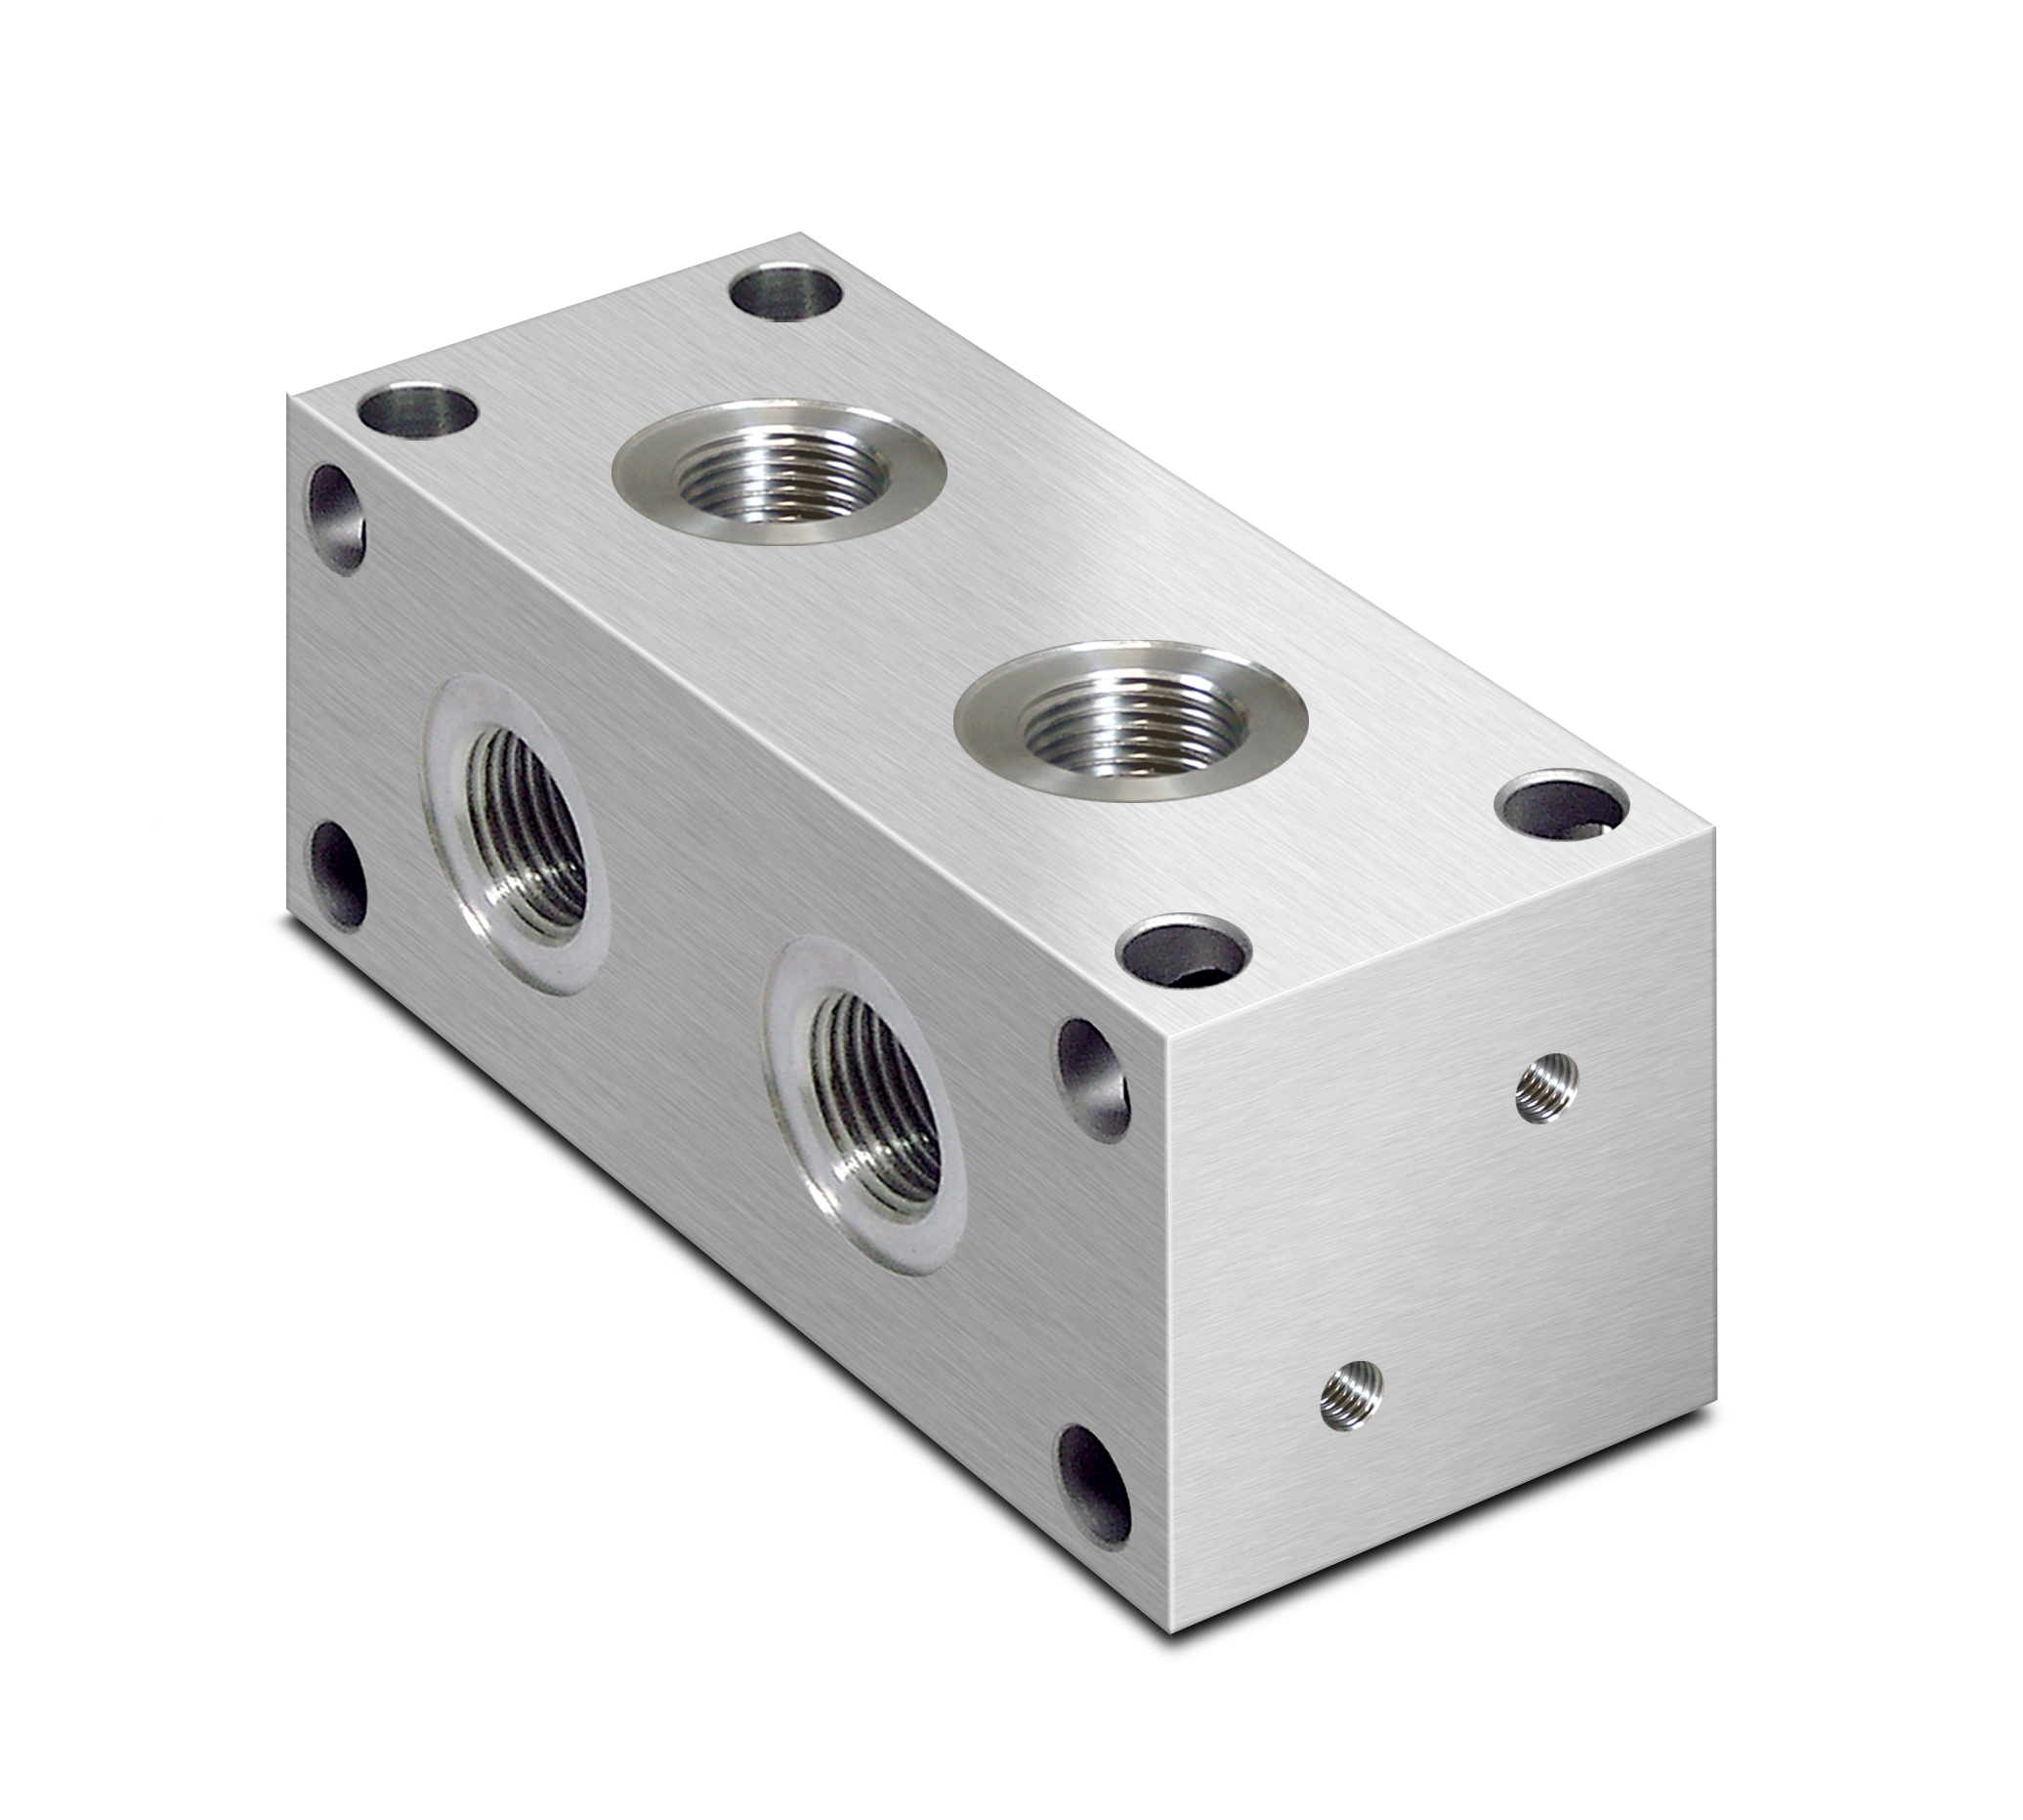 Bsp Manifold 6 Hole 2 x 3/8 Bsp x 4 x 1/4 Bsp Double Sided Outlet Ports 